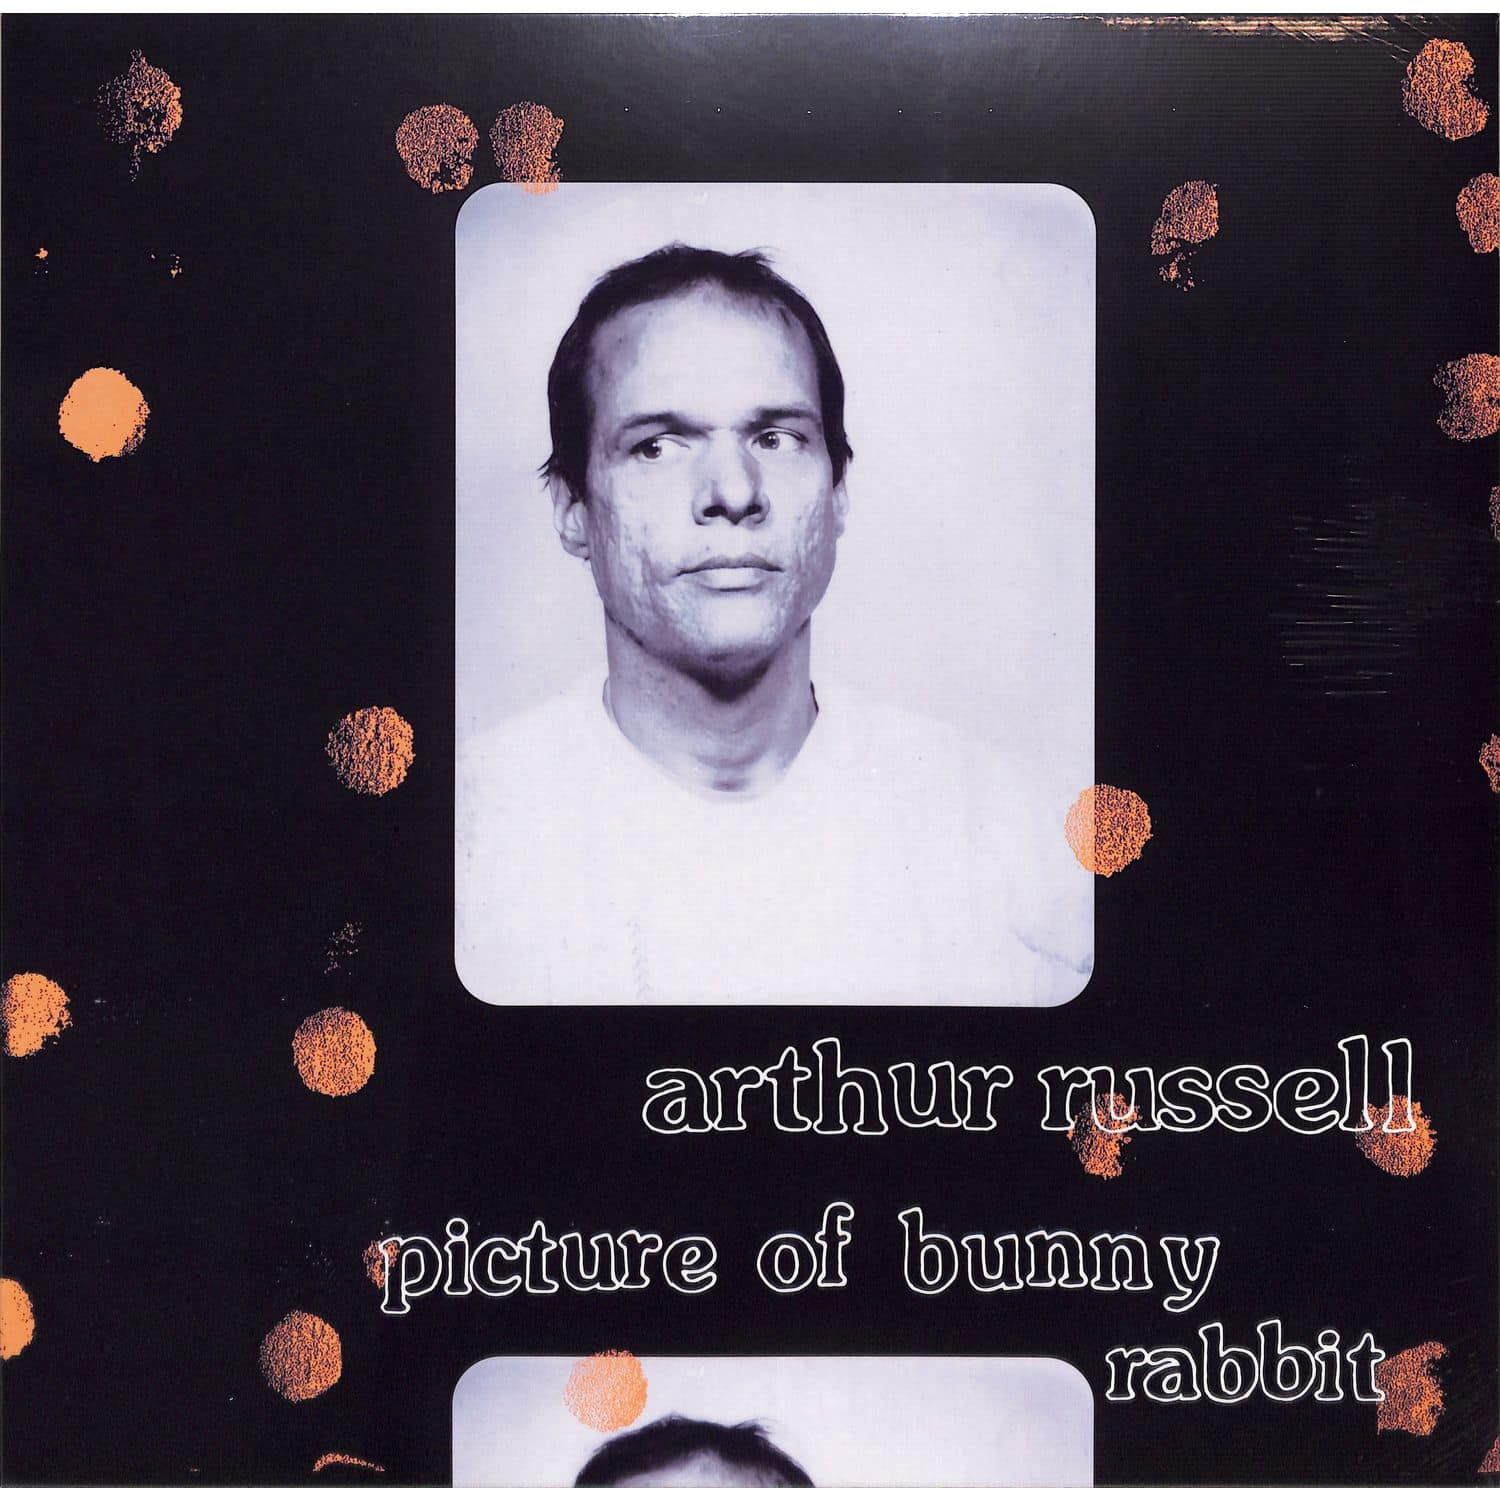 Arthur Russell - PICTURE OF BUNNY RABBIT 